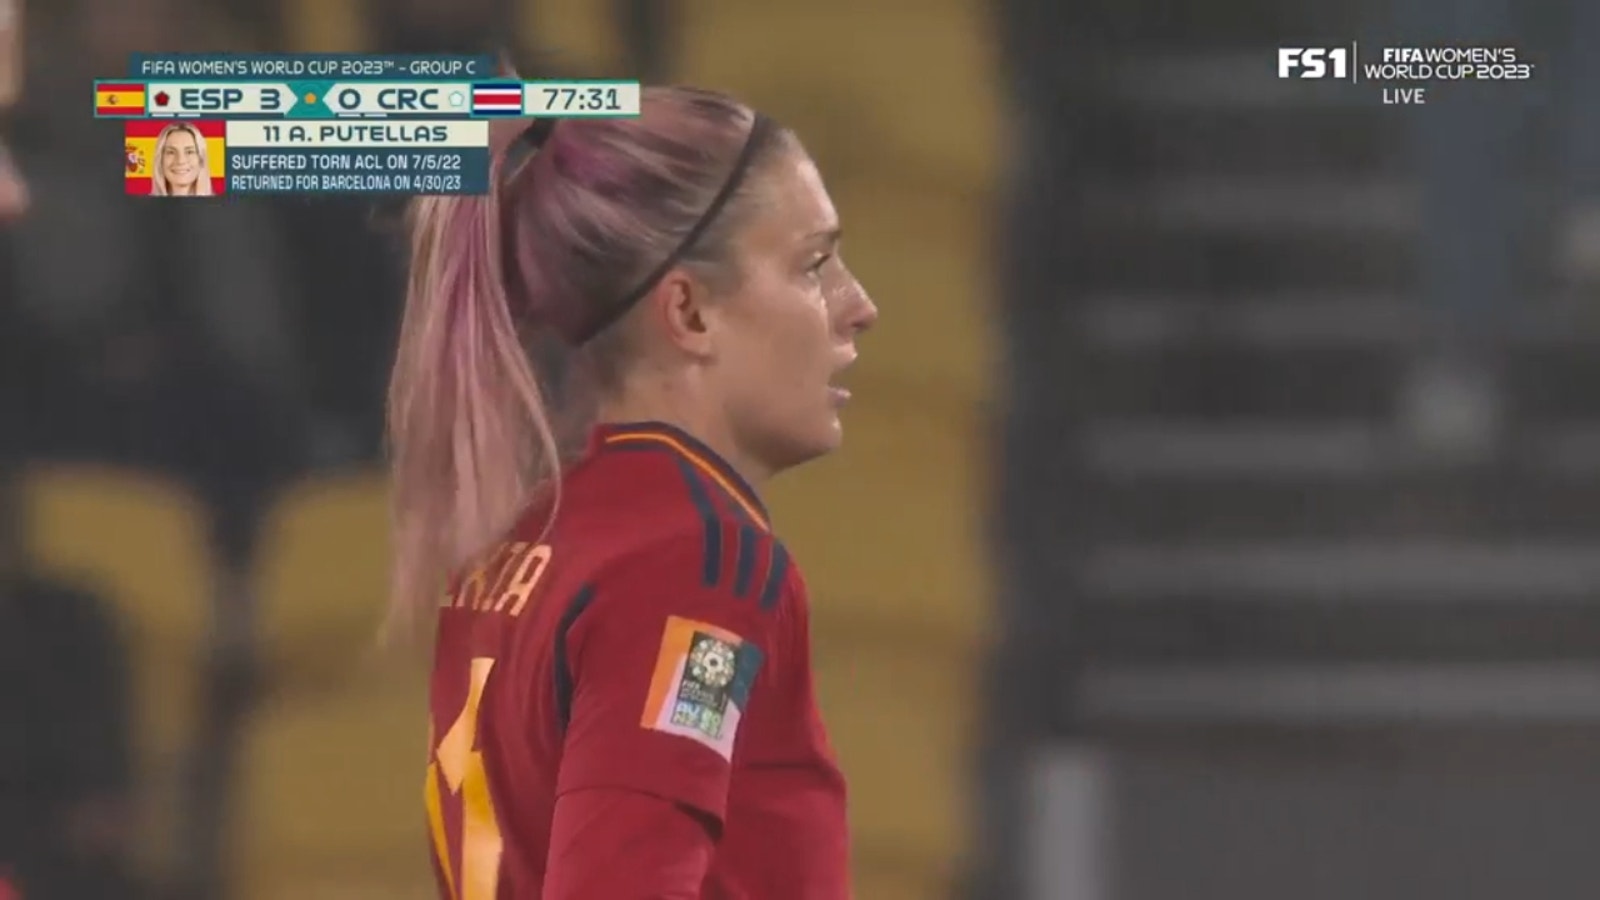 Spain's Alexia Putellas comes on as sub in 77th minute